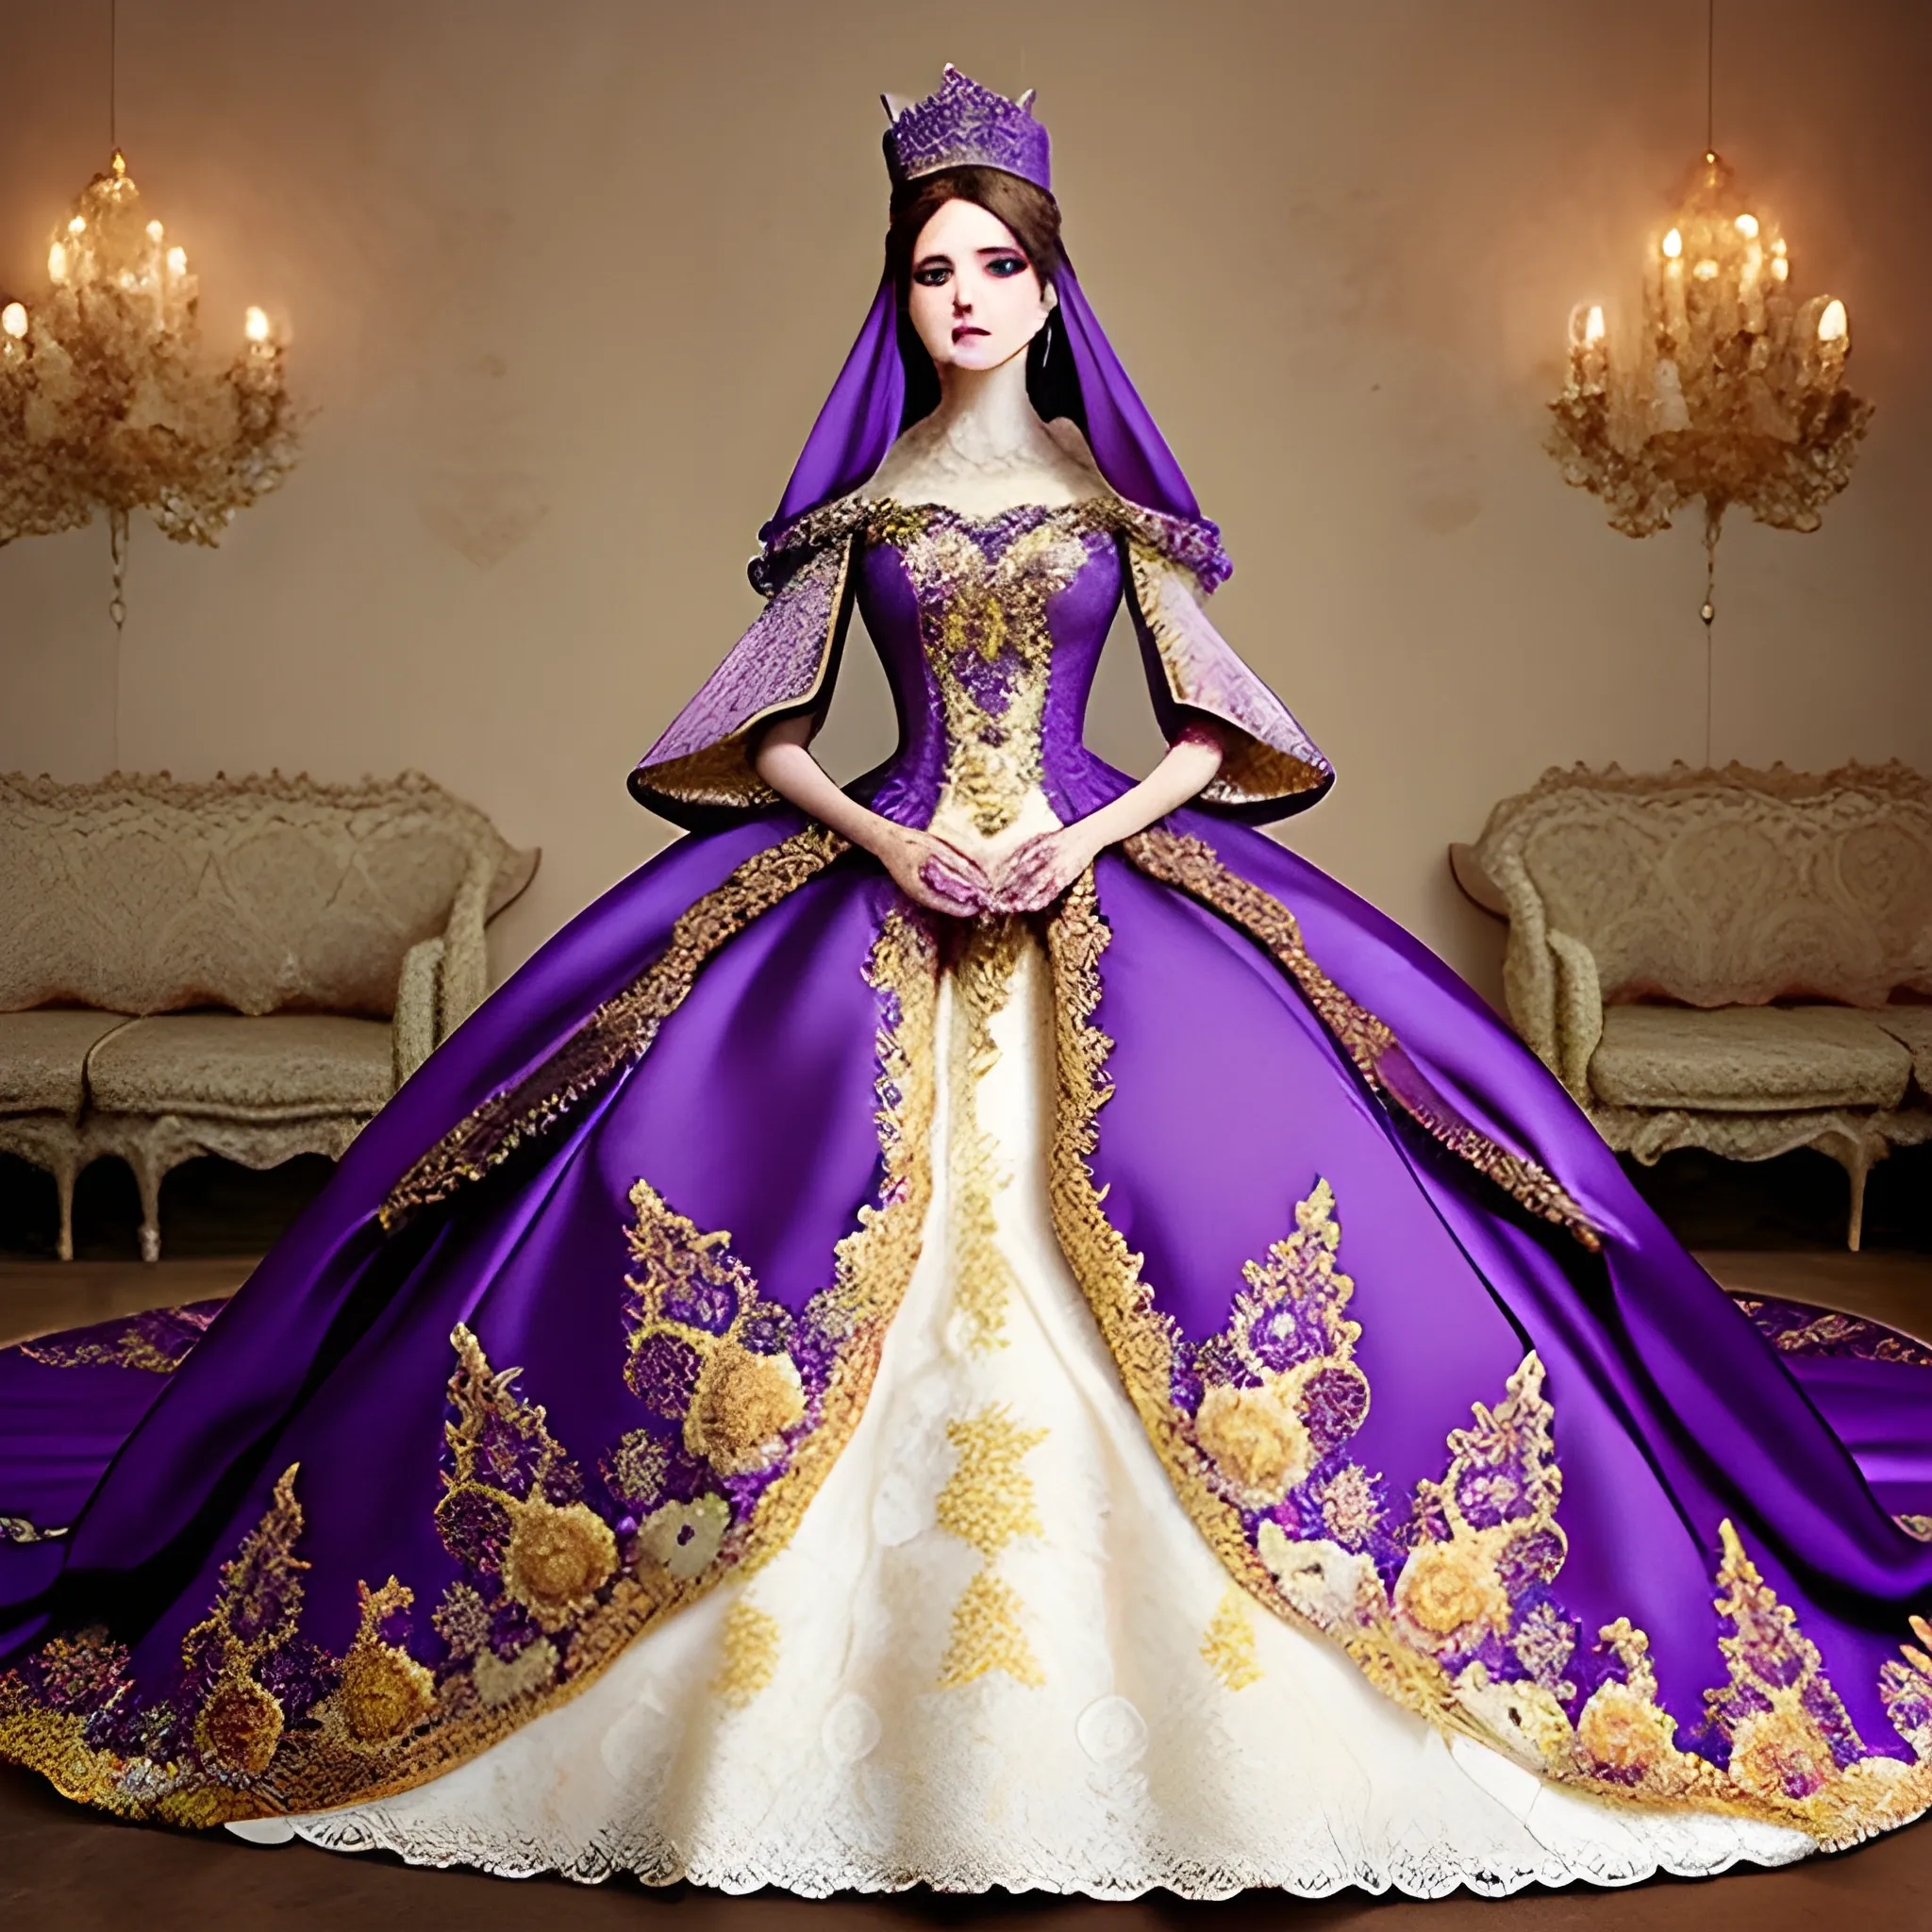 Intricate fantasy wedding gown purple and gold lace goddess train empress sleeves crown style extravagant